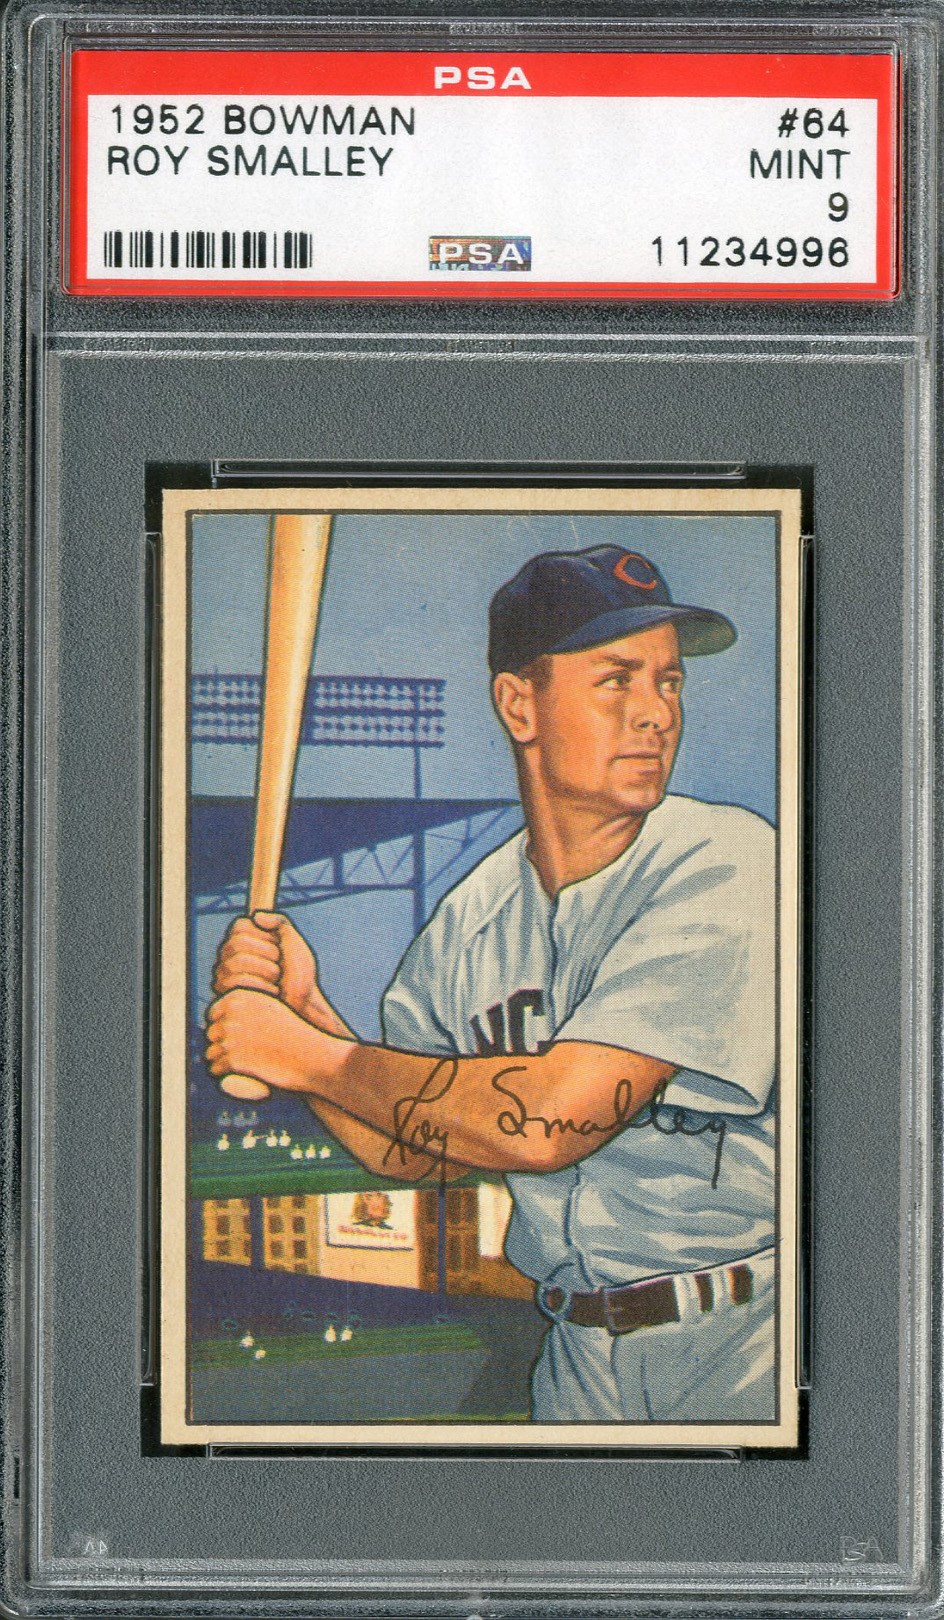 Baseball and Trading Cards - 1952 Bowman #64 Roy Smalley PSA MINT 9